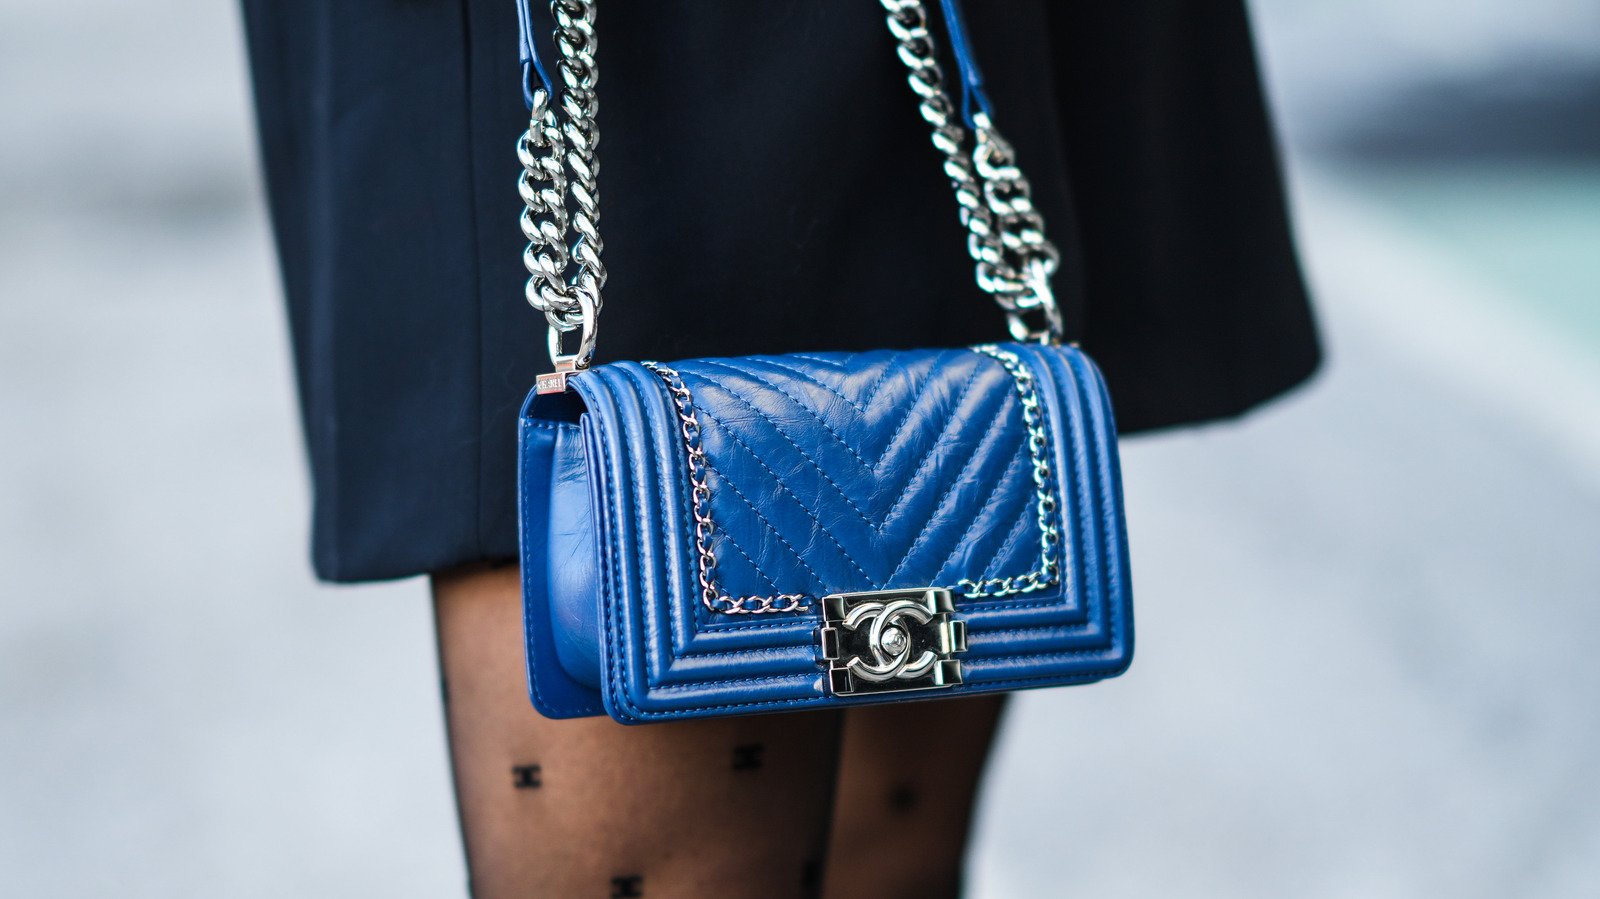 Where to rent designer bags with Luxe Bag Rental